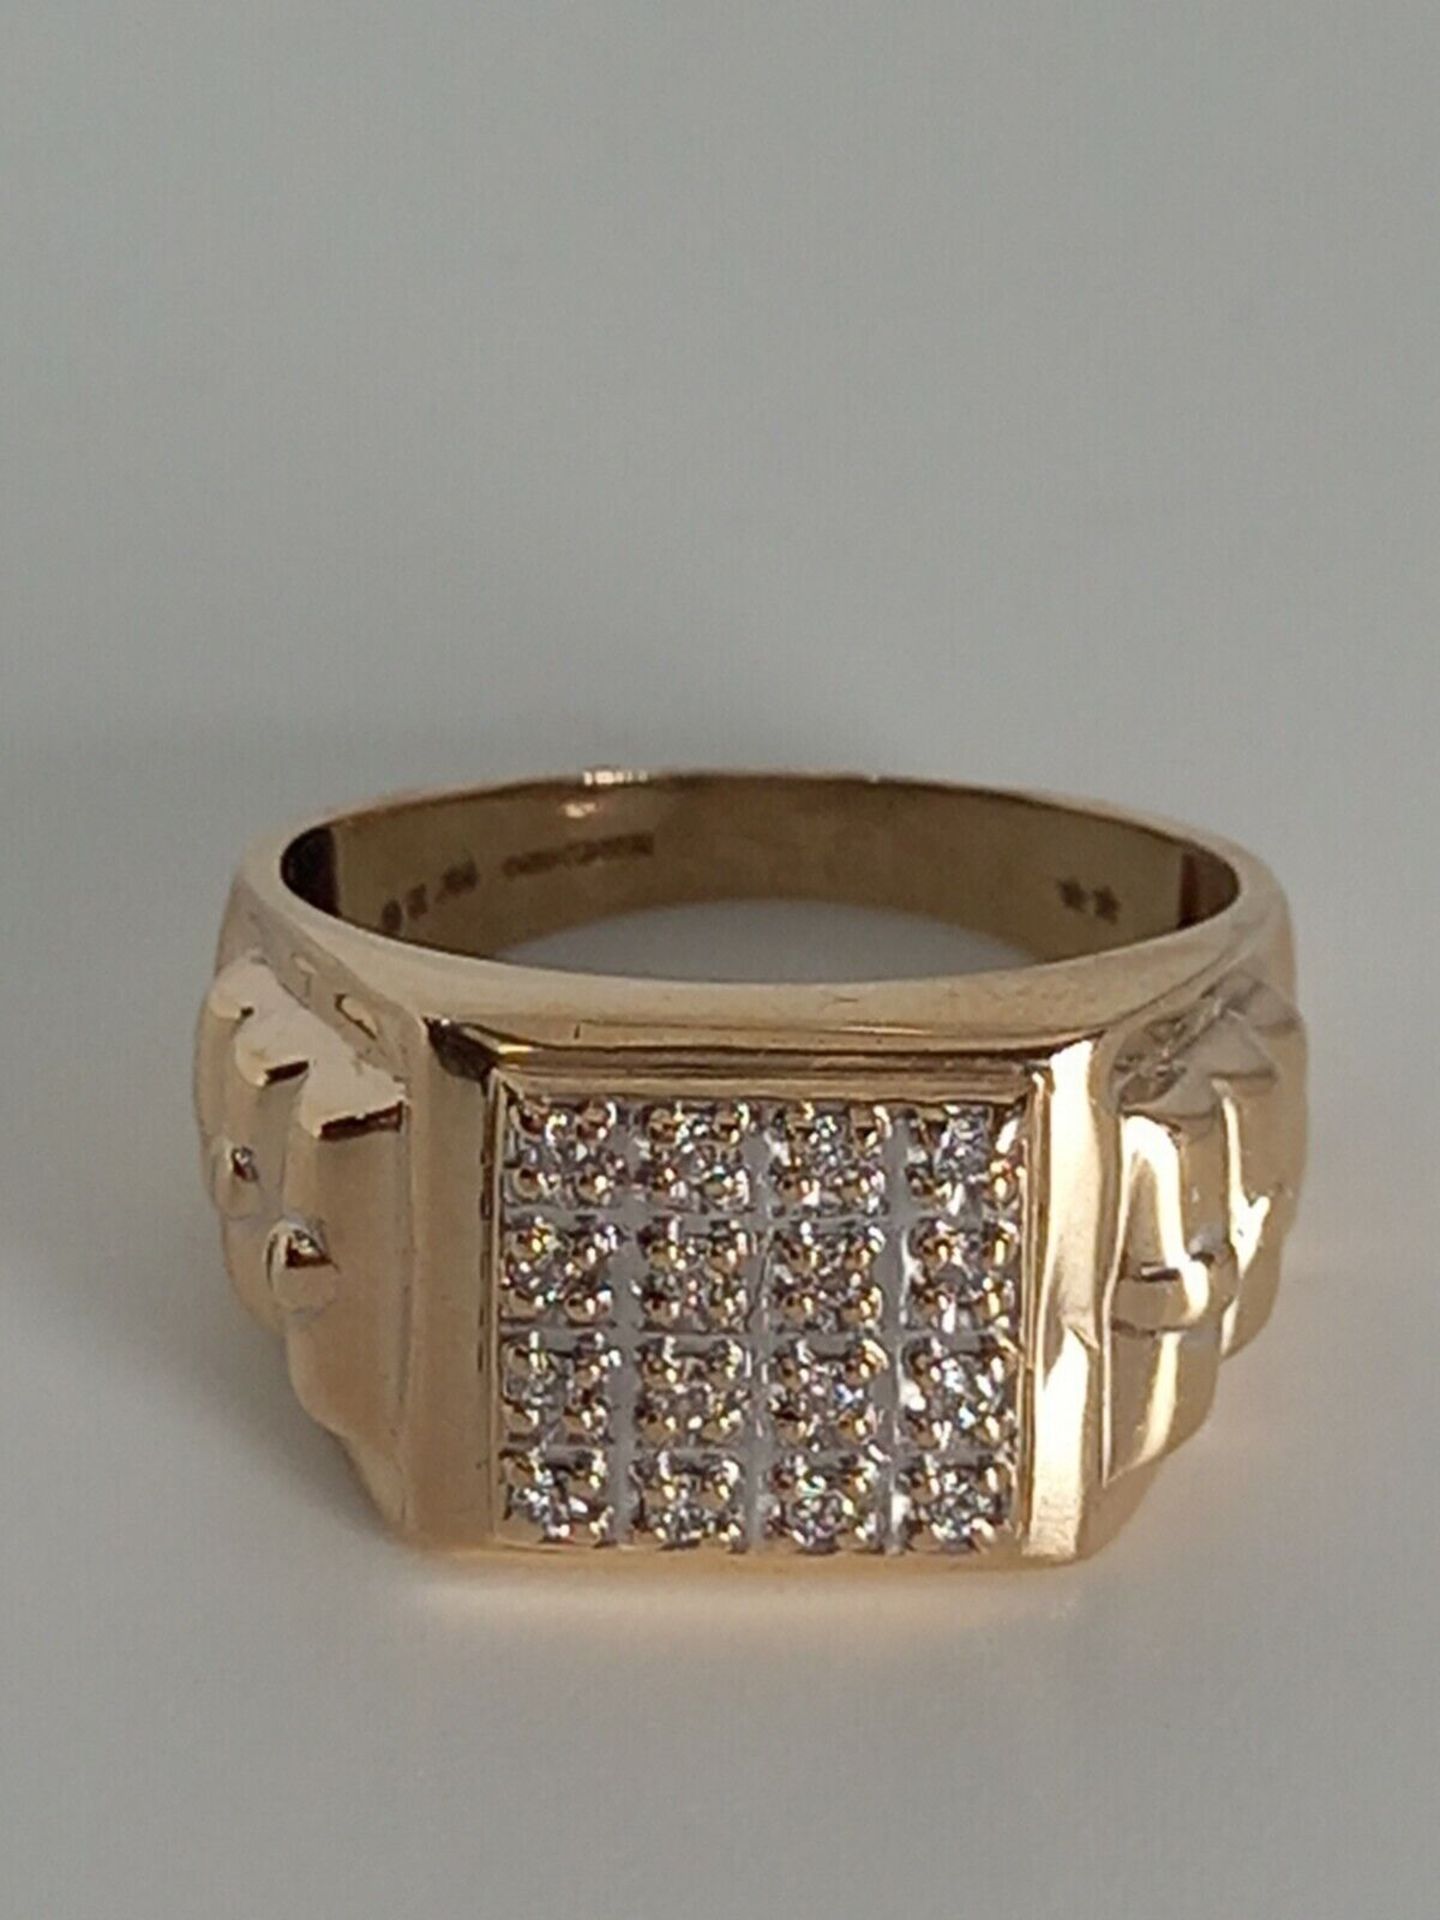 SIGNET RING FEATURES 16 DIAMONDS IN A LUX PAVE SETTING, ENCLAVED IN 9CT YELLOW GOLD